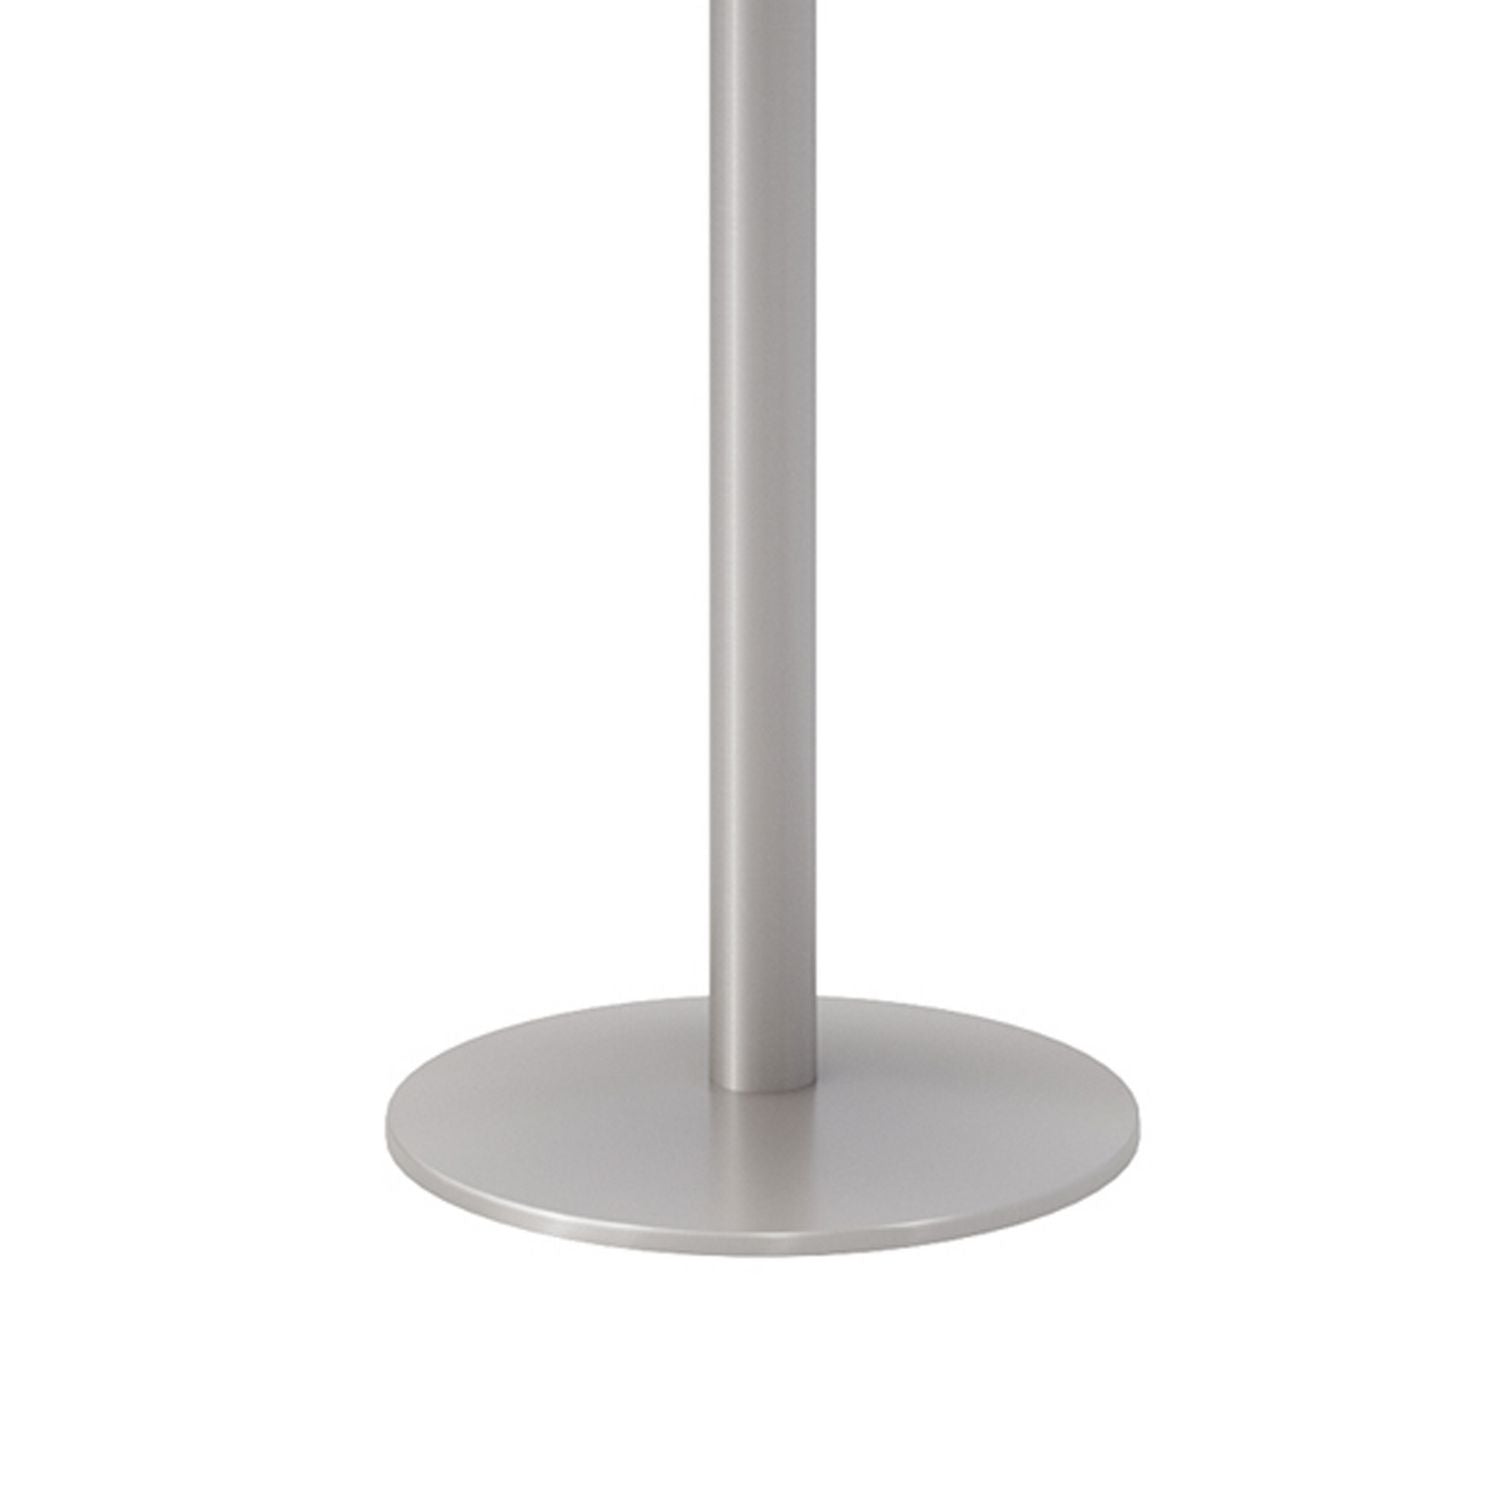 pedestal-table-with-four-light-gray-kool-series-chairs-round-36-dia-x-29h-designer-white-ships-in-4-6-business-days_kfi811774036719 - 3